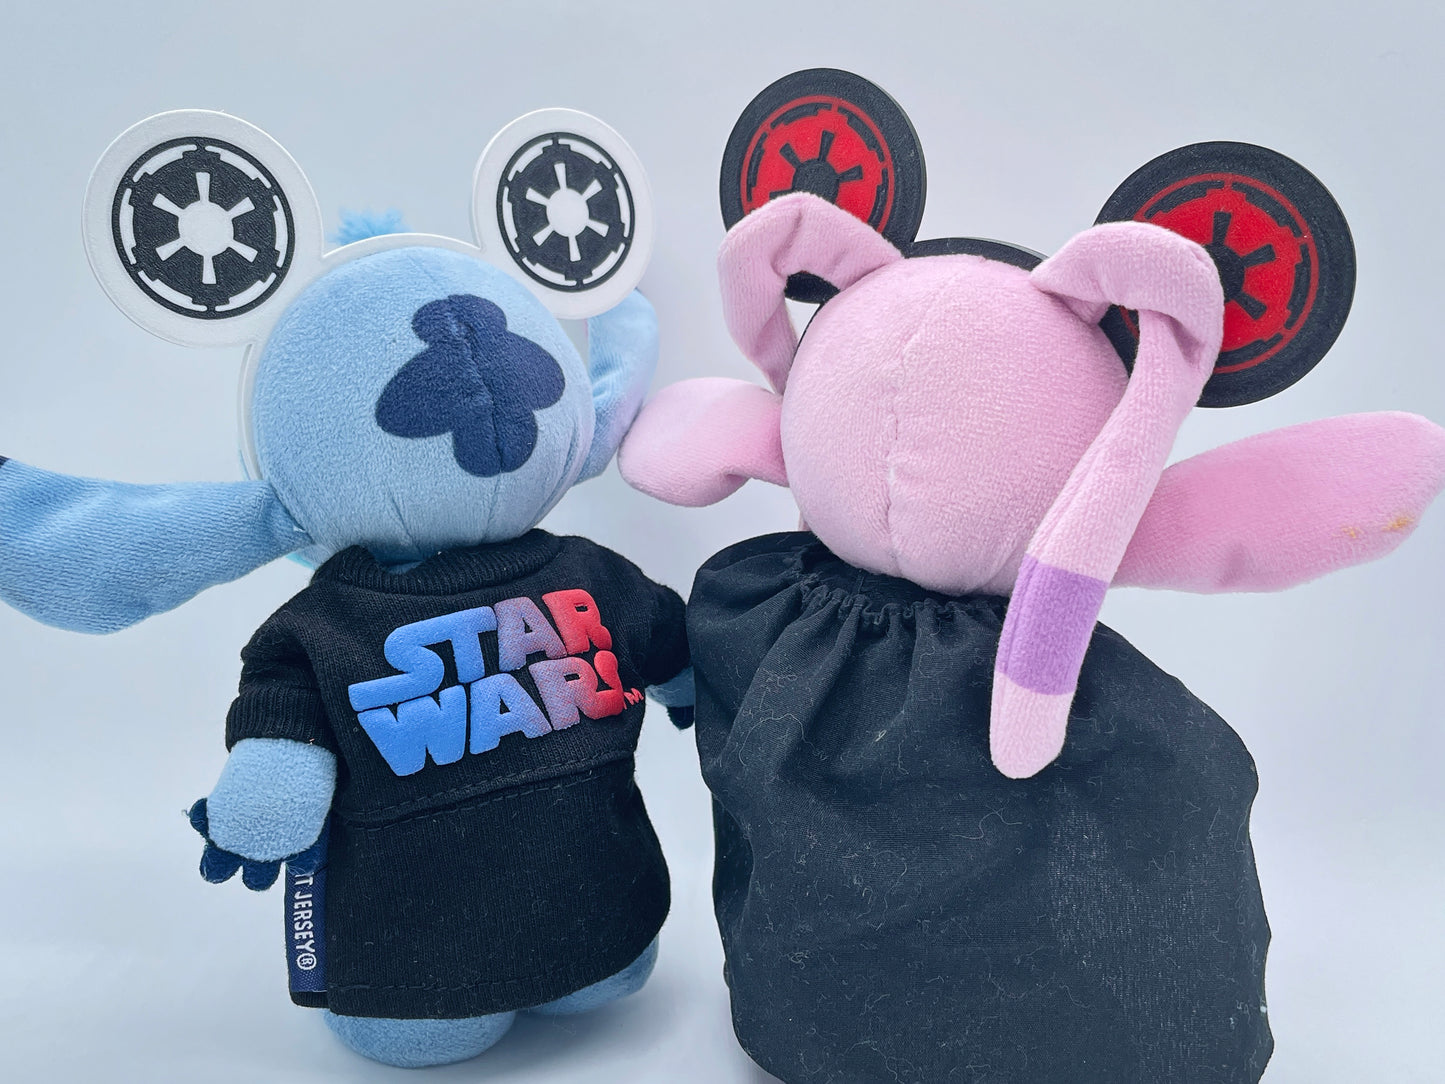 Star Wars Empire Themed Ears for NuiMO Plushes